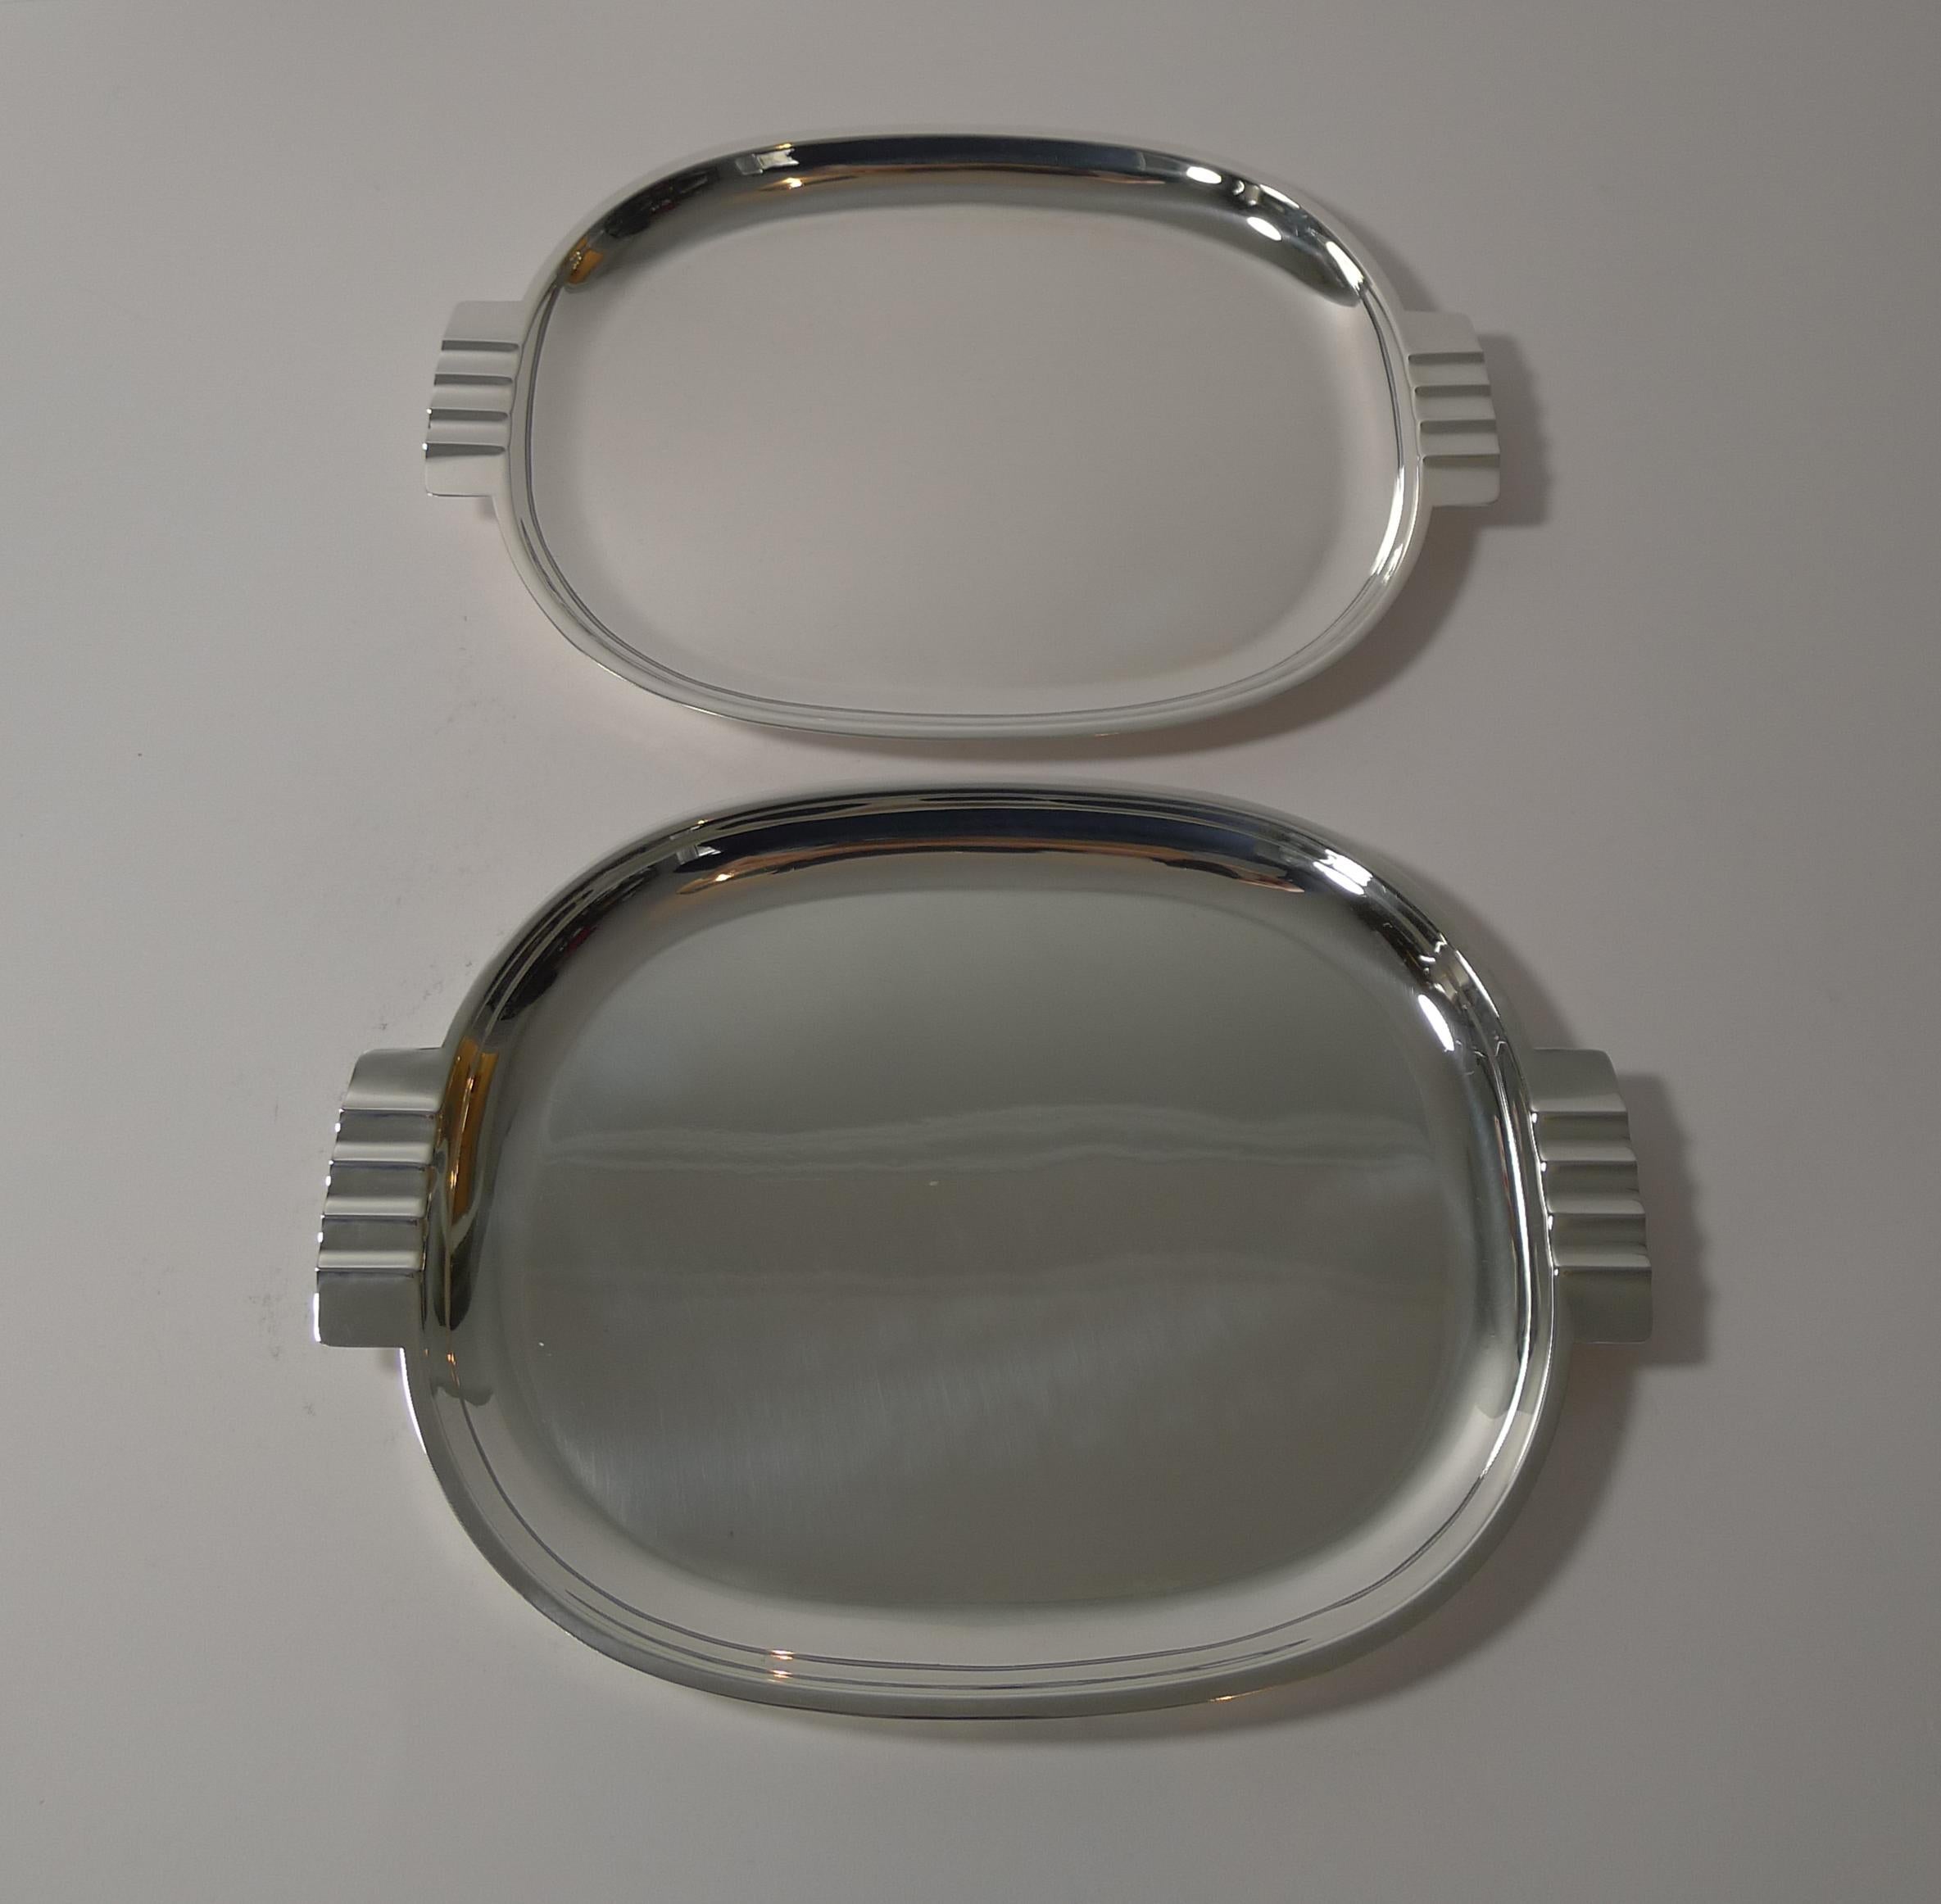 A fabulous pair of vintage silver plated cocktail / hors d'oeuvres dishes in a stunning Art Deco design, about as stylish as they come.

Each is marked on the underside EPNS for Electro-Plated Nickel Silver and they are lucky enough to have an